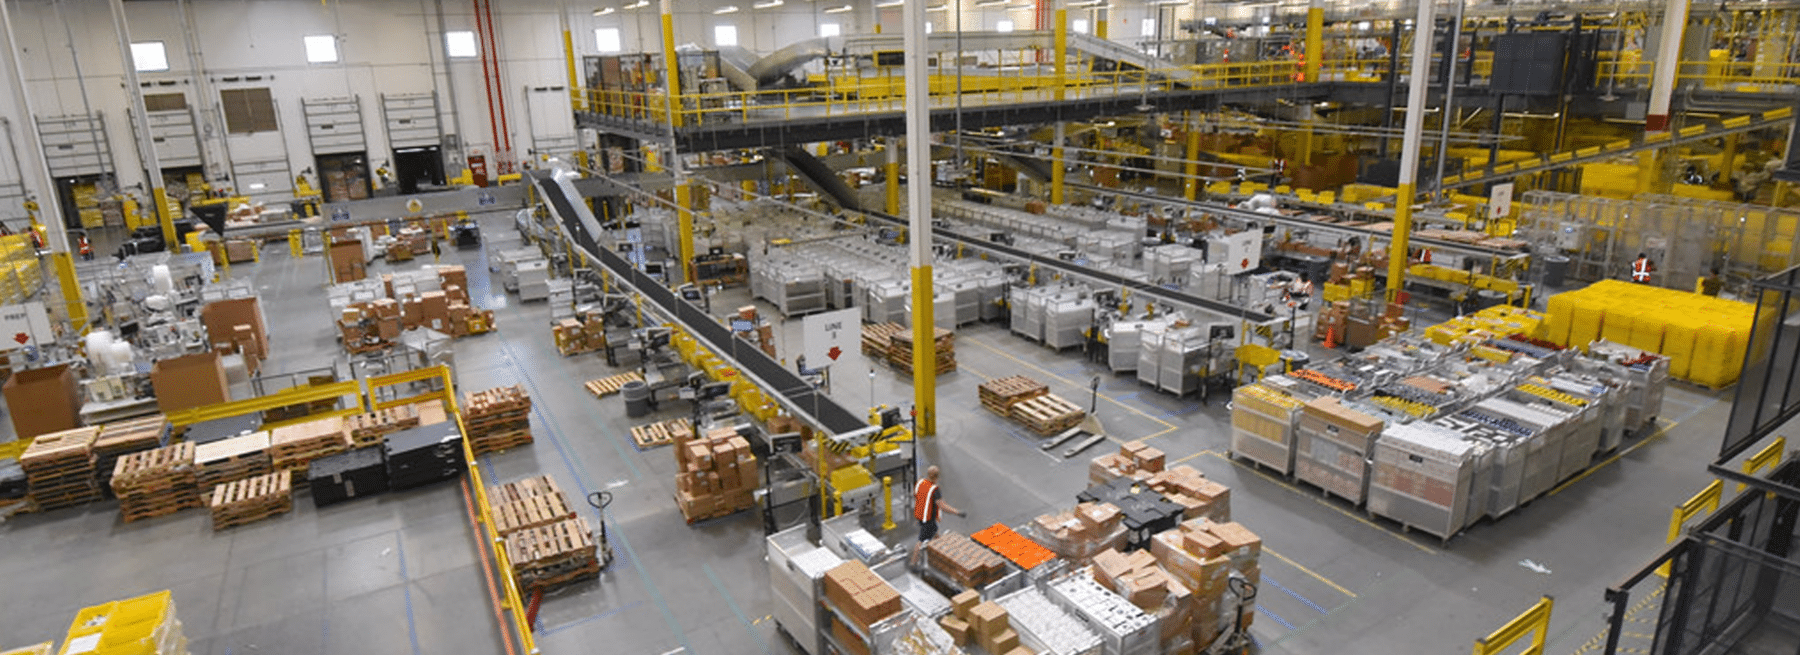 Security risks of microfulfillment centers